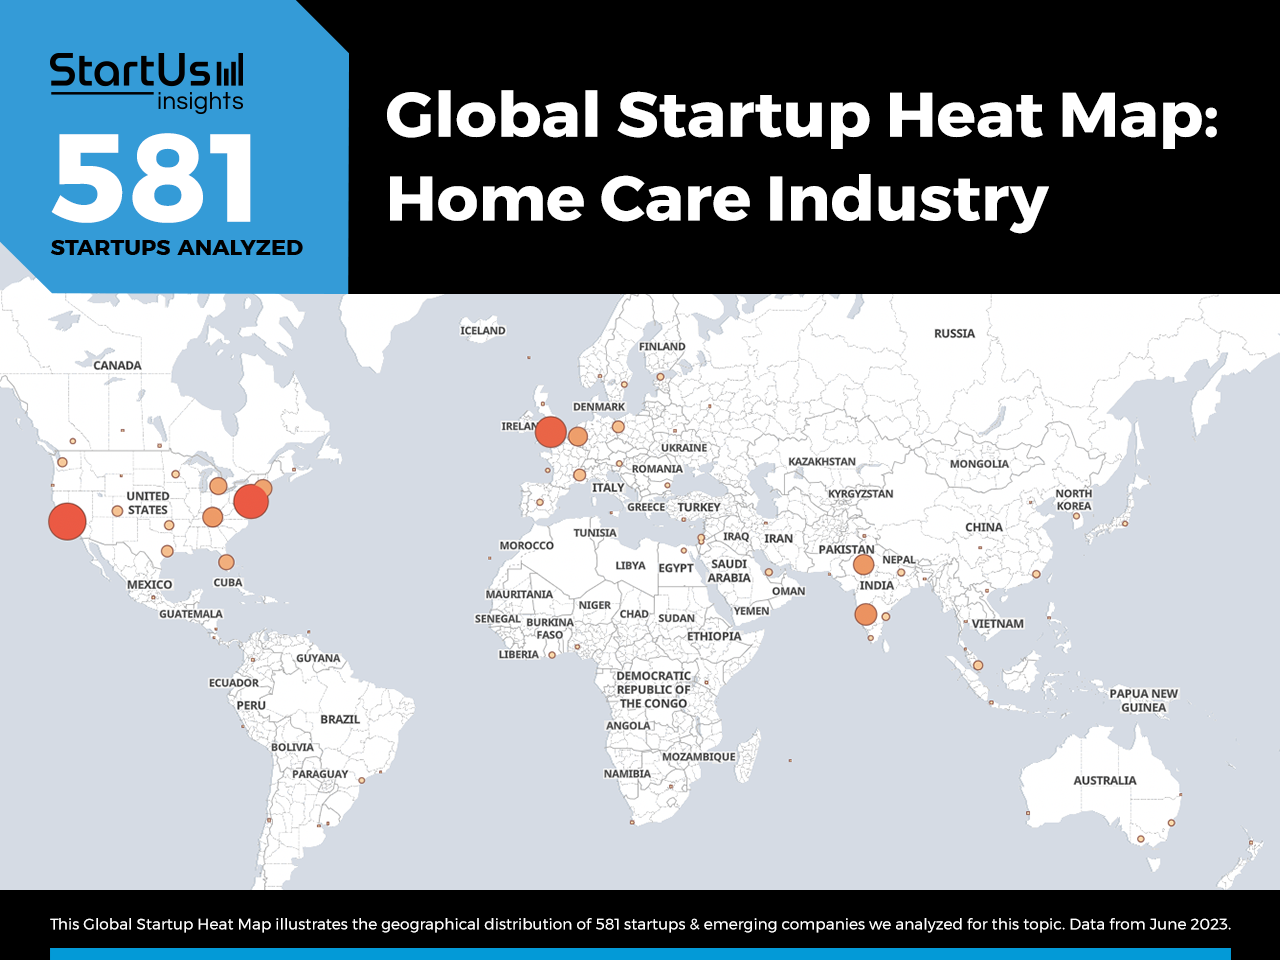 Home-Care-Industry-Trends-TrendResearch-Heat-Map-StartUs-Insights-noresize